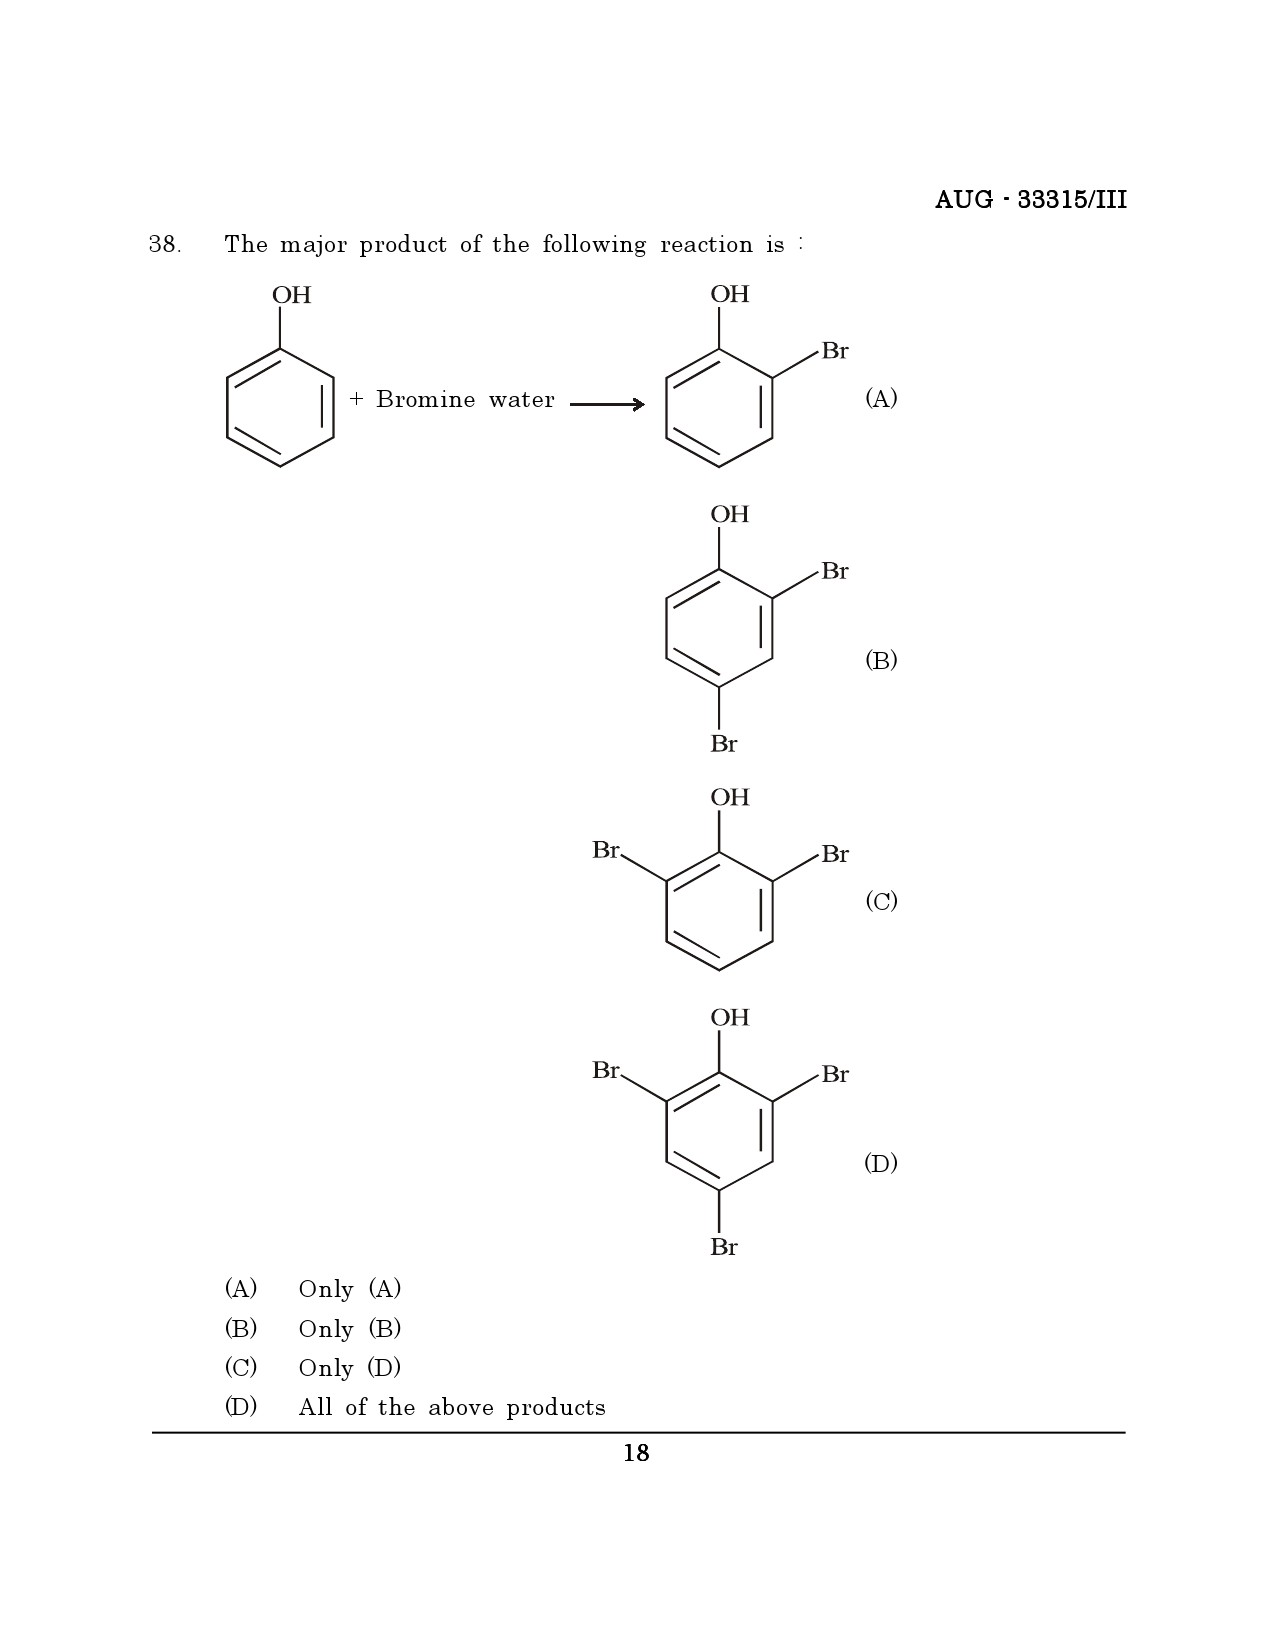 Maharashtra SET Chemical Sciences Question Paper III August 2015 17